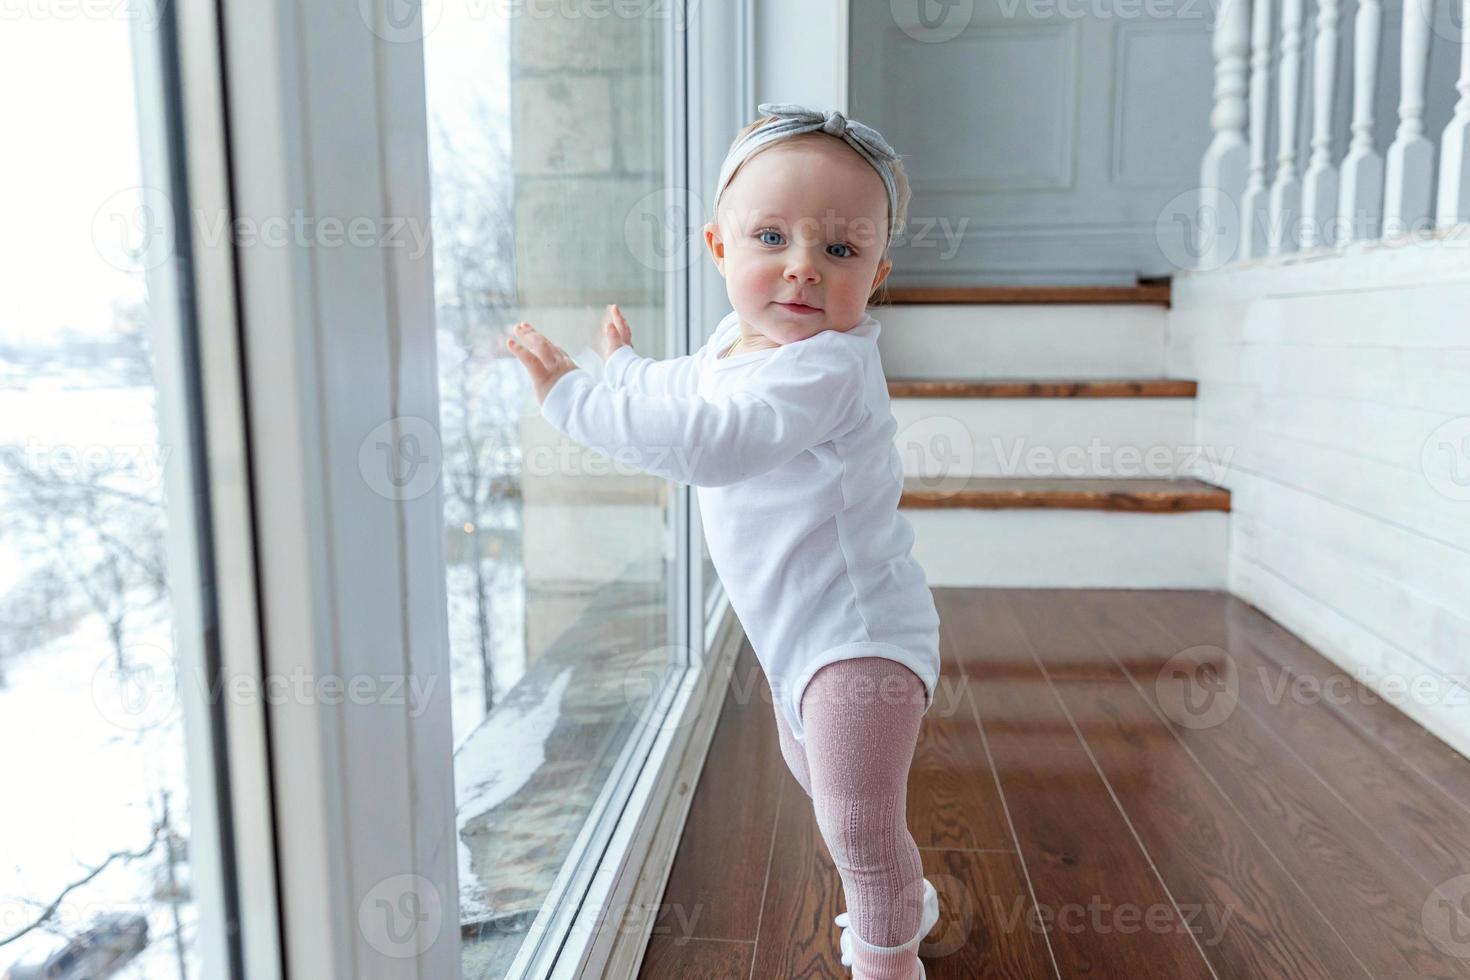 Little crawling baby girl one year old siting on floor in bright light living room near window smiling and laughing photo